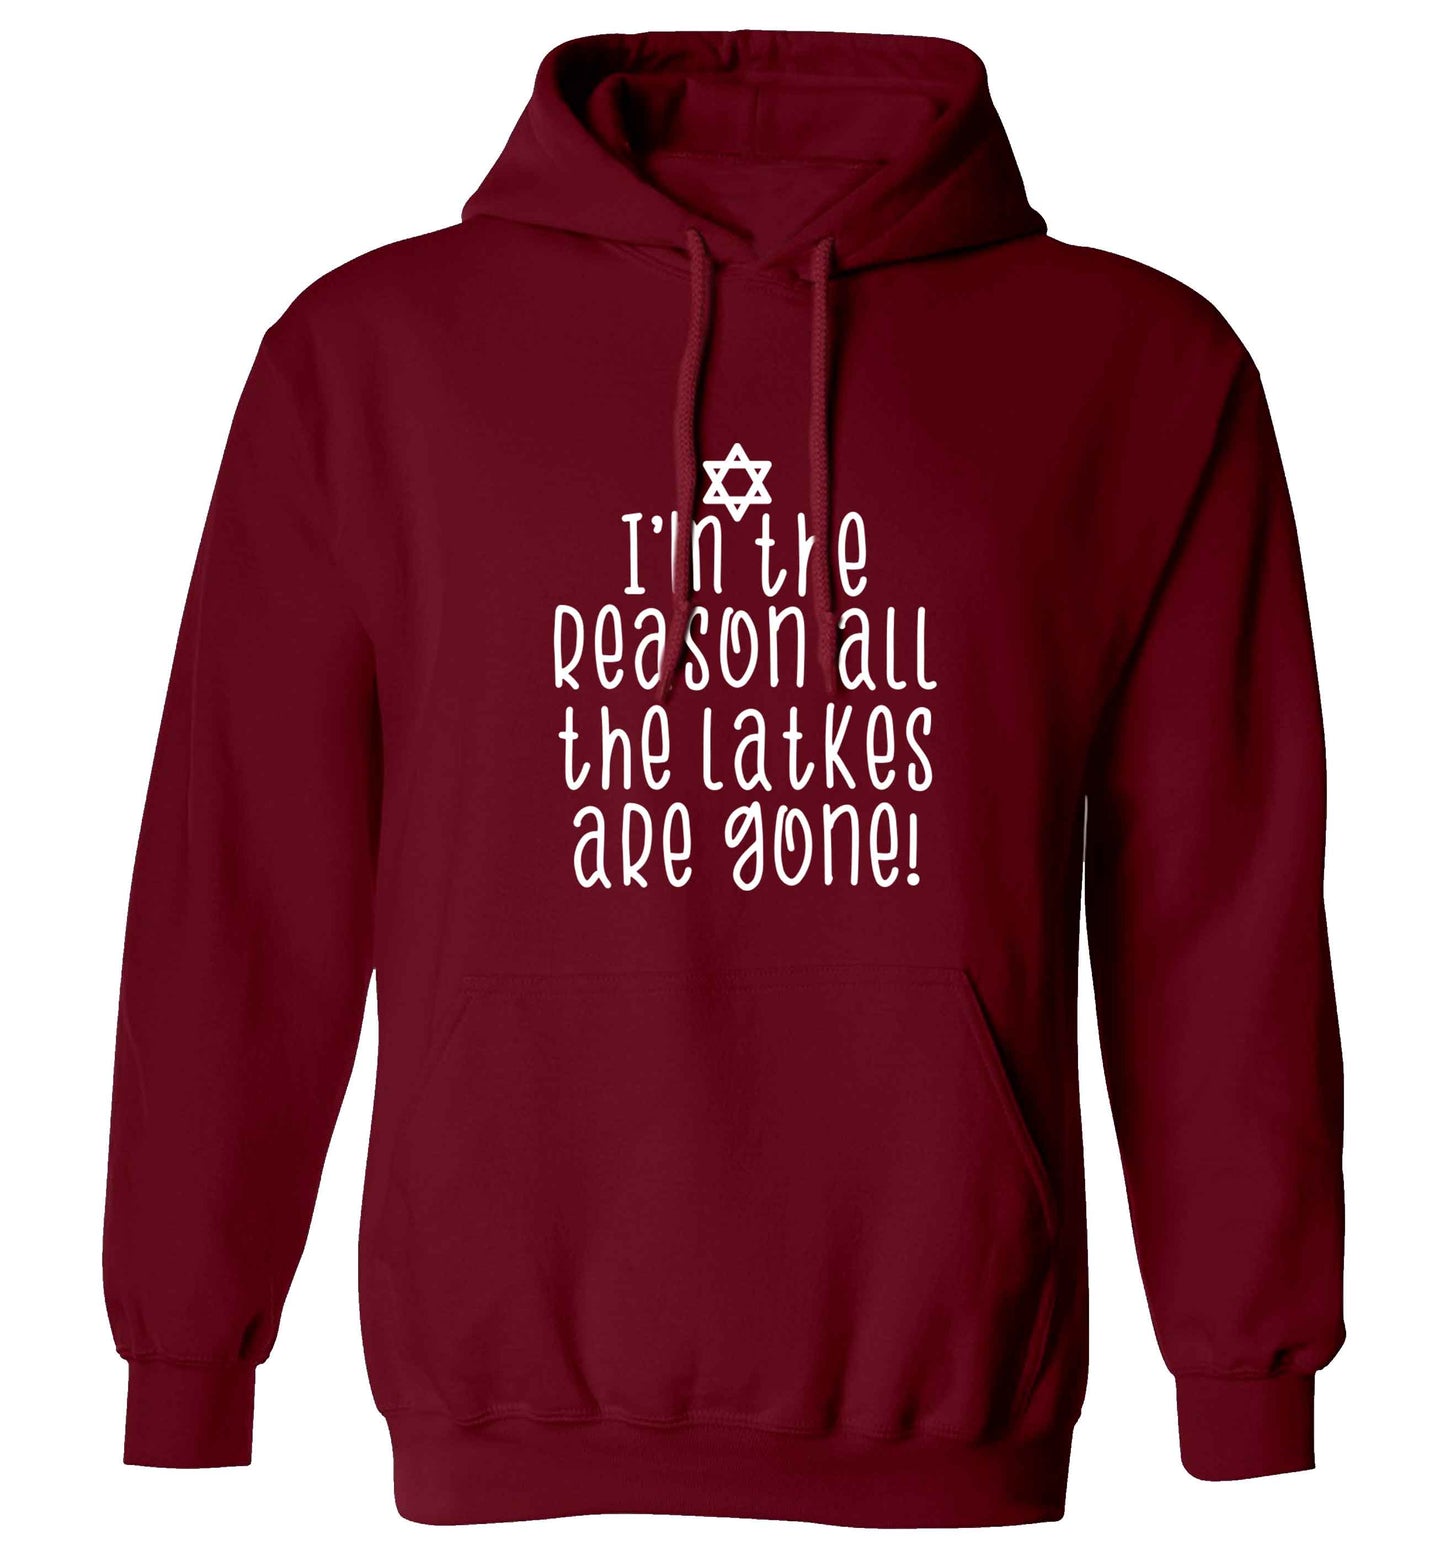 I'm the reason all the latkes are gone adults unisex maroon hoodie 2XL